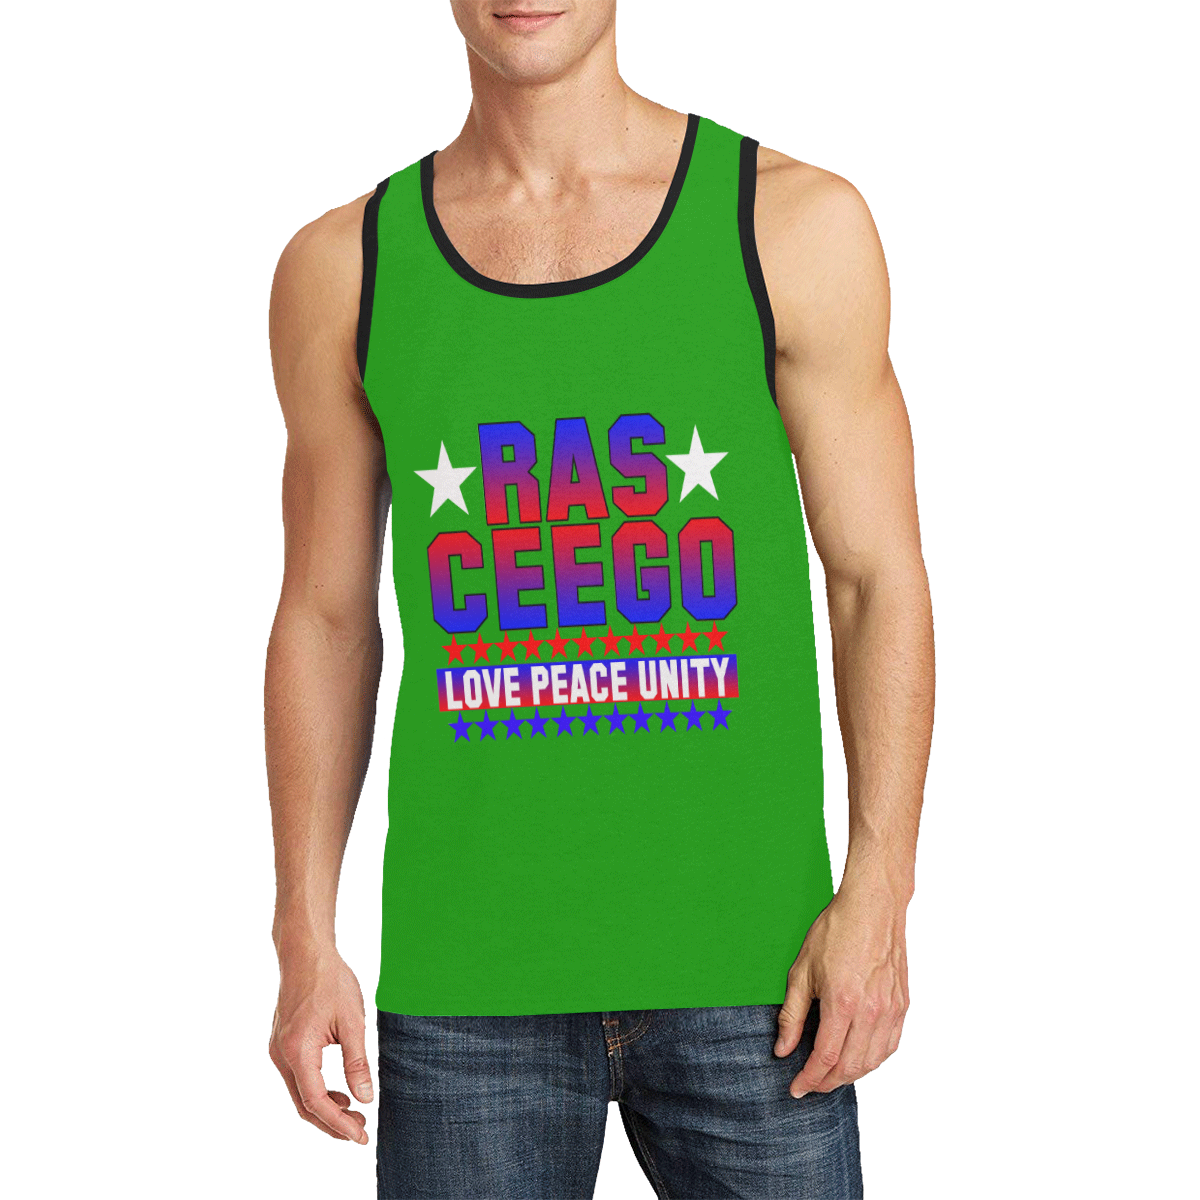 Ras CeeGo green red white blue Men's All Over Print Tank Top (Model T57)